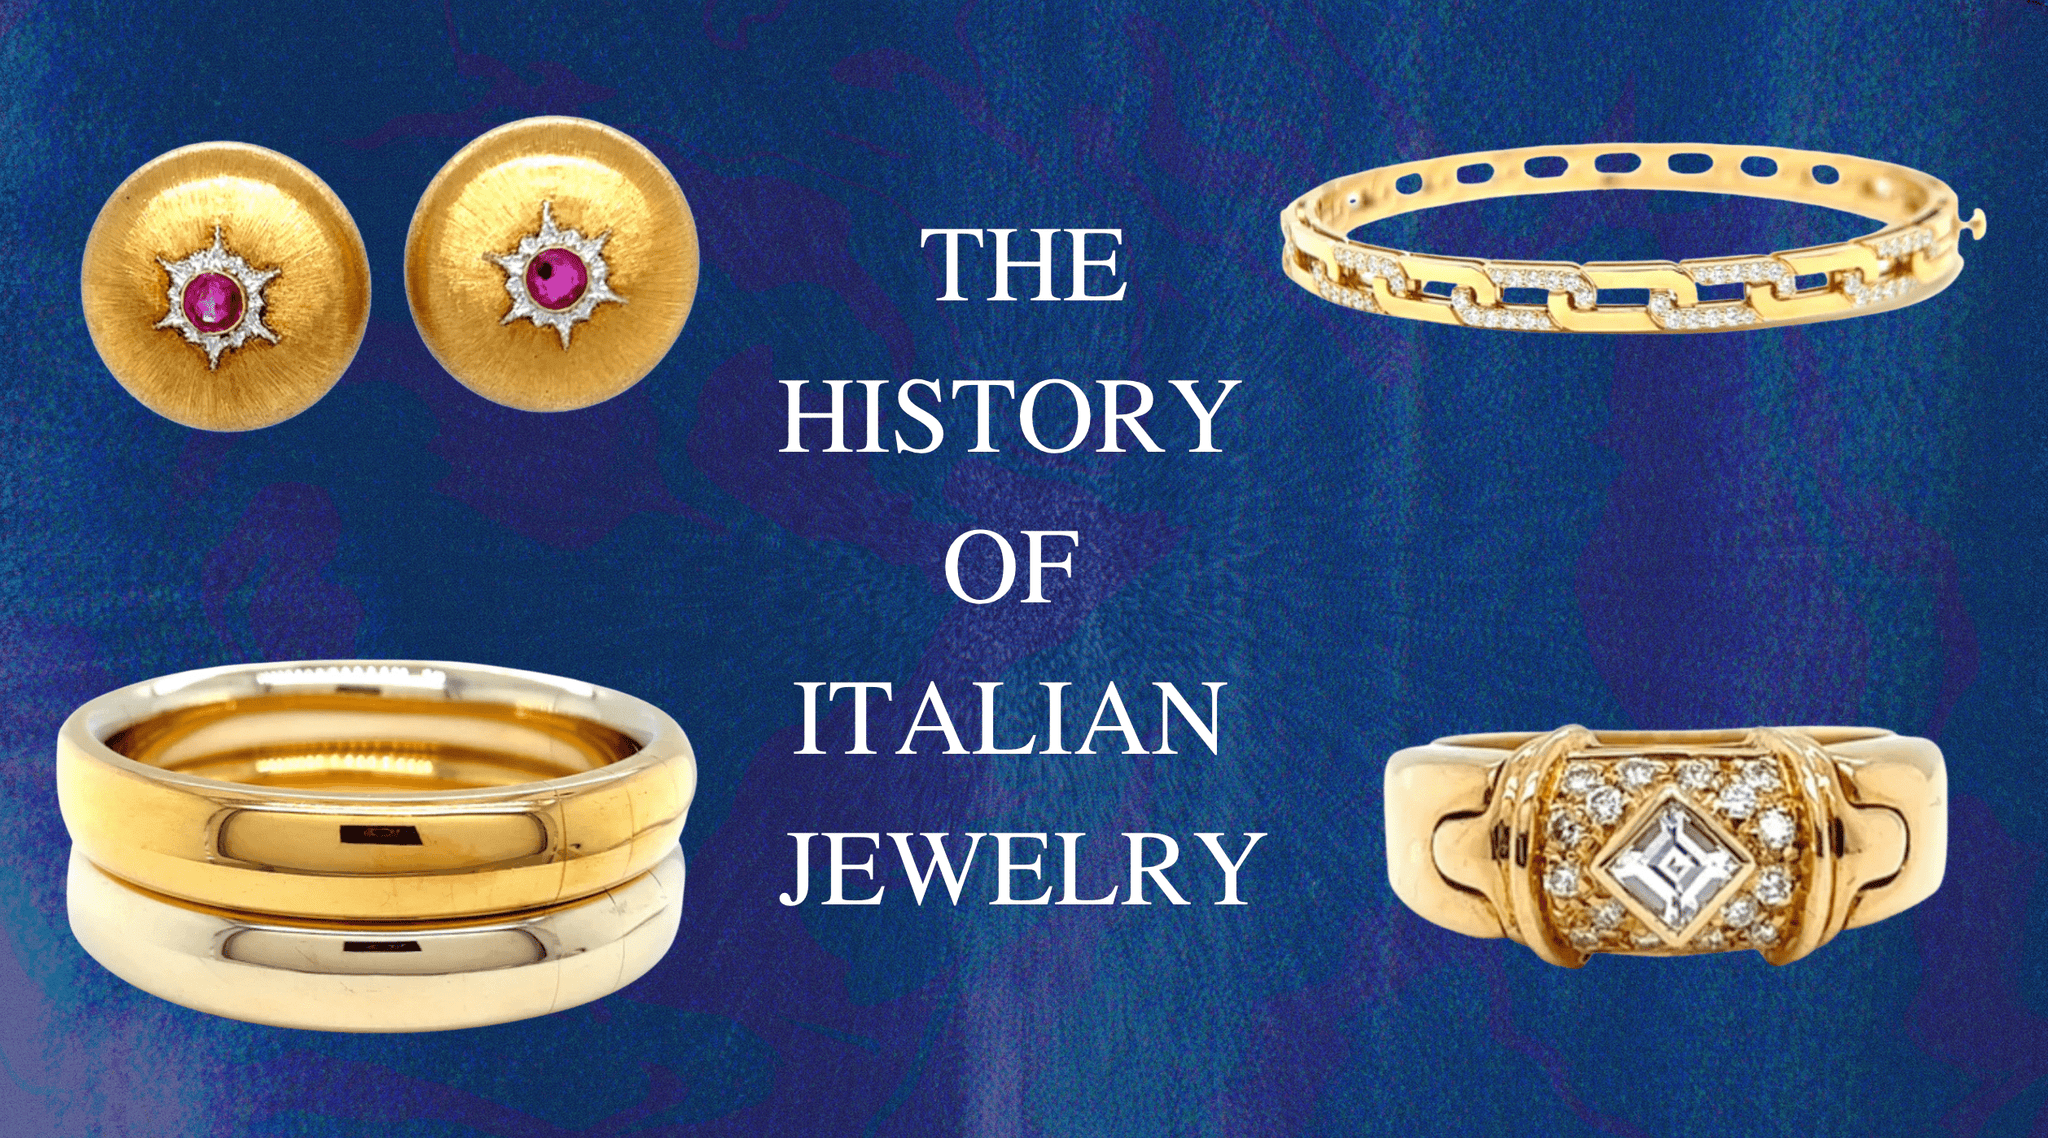 The History of Italian Jewelry - Jack Weir & Sons